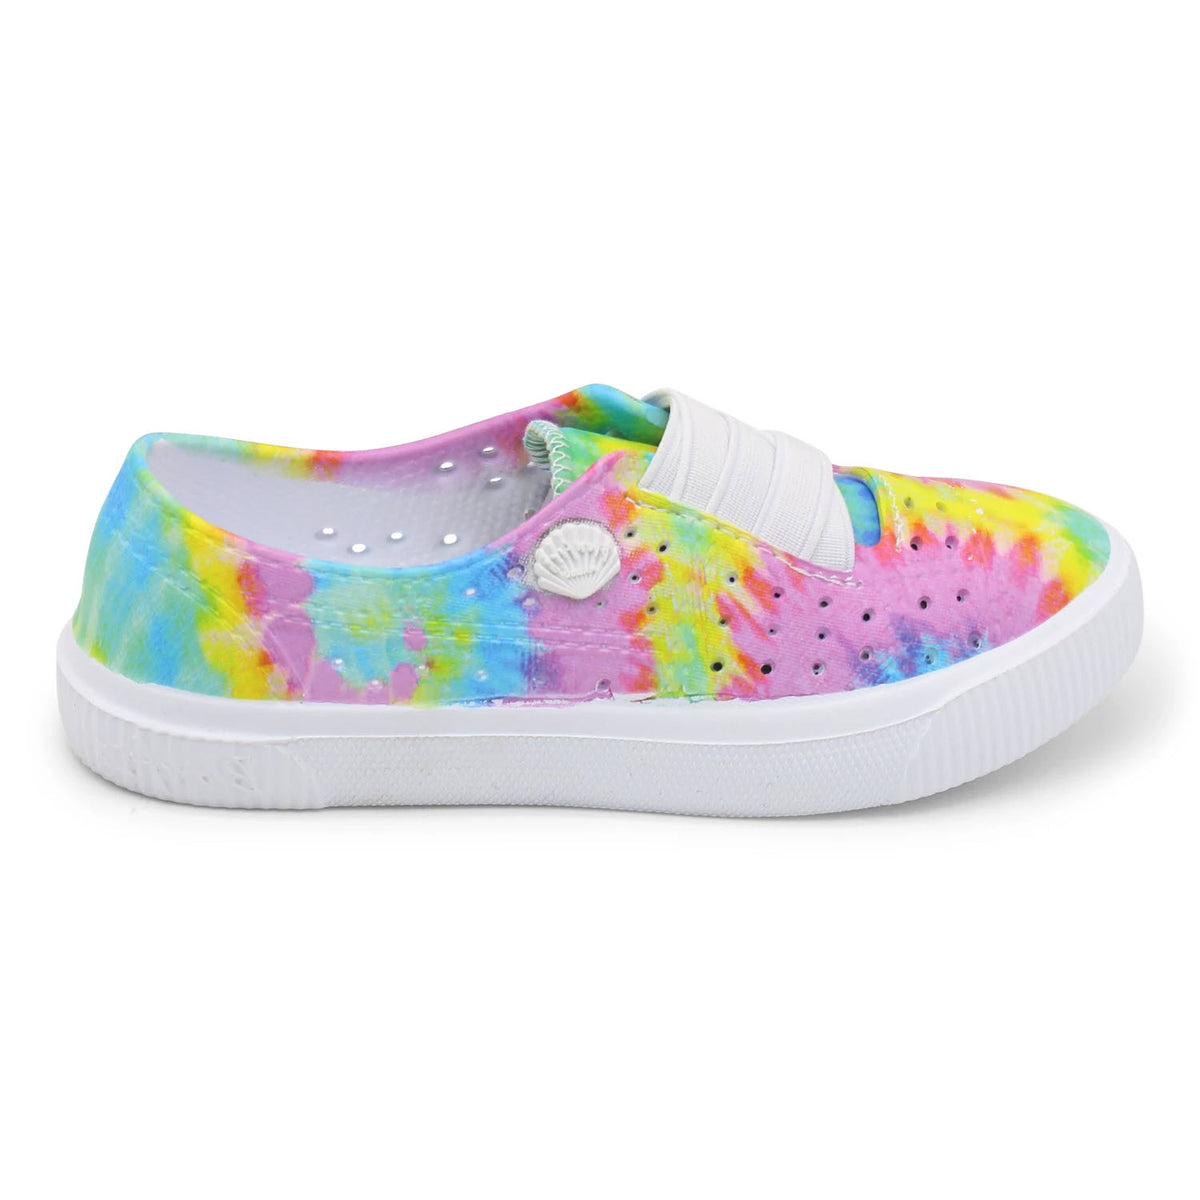 Colorful kids&#39; BLOWFISH RIOO TODDLERS PASTEL TIE DYE slip-on sneaker with a cushioned insole.